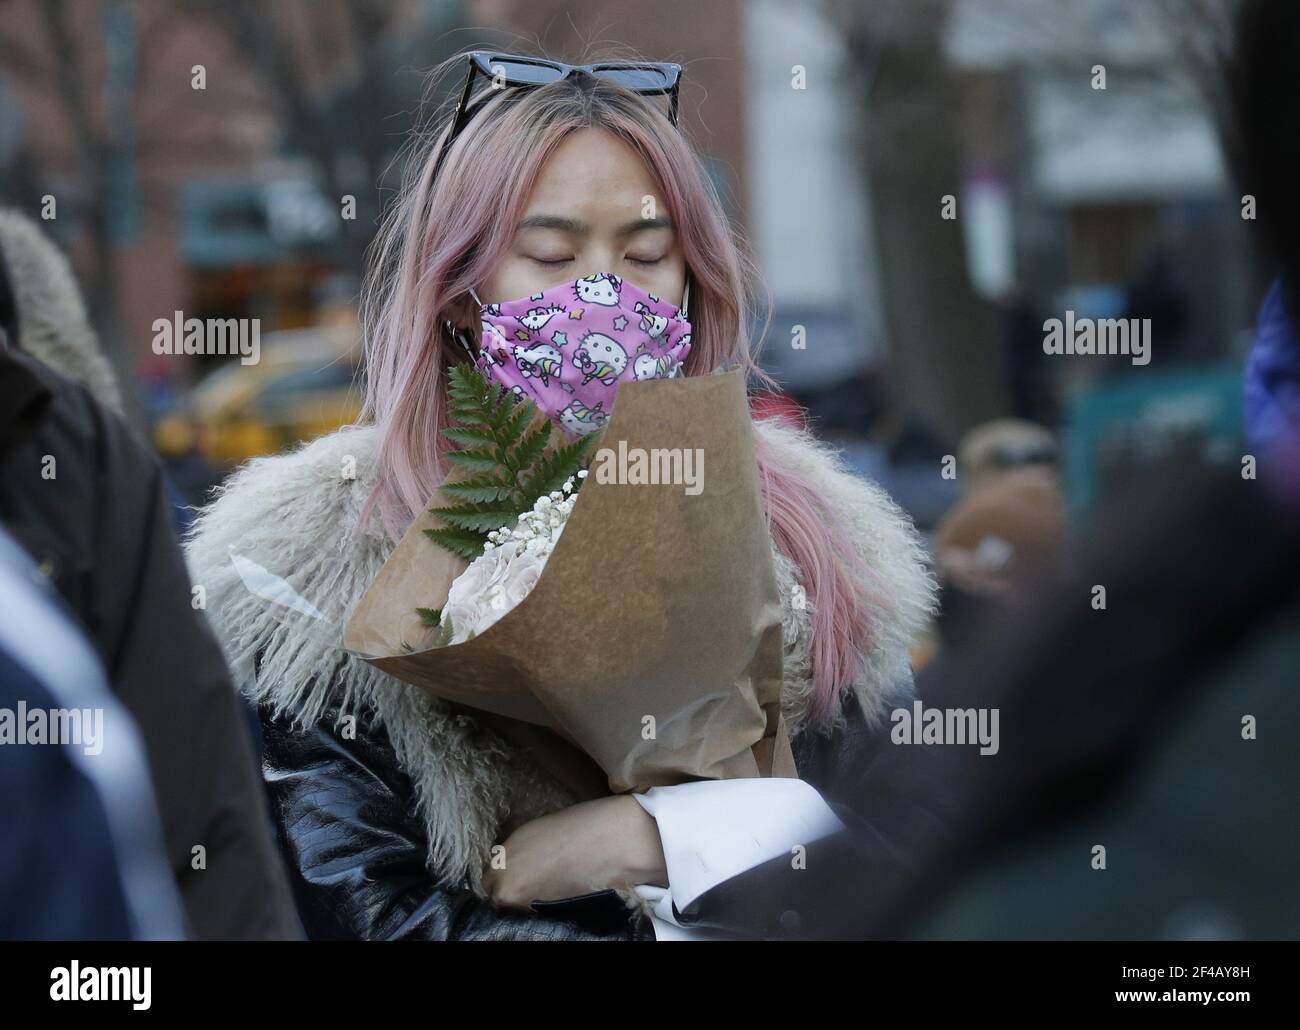 New York, United States. 19th Mar, 2021. A girl holds flowers at a Vigil for Peace organized by Asian American Federation in Union Square in New York City on Friday, March 19, 2021. President Biden on Friday urged Congress to pass hate crime legislation to address the increase in discrimination and violence against Asian Americans during the COVID-19 pandemic. Photo by John Angelillo/UPI Credit: UPI/Alamy Live News Stock Photo